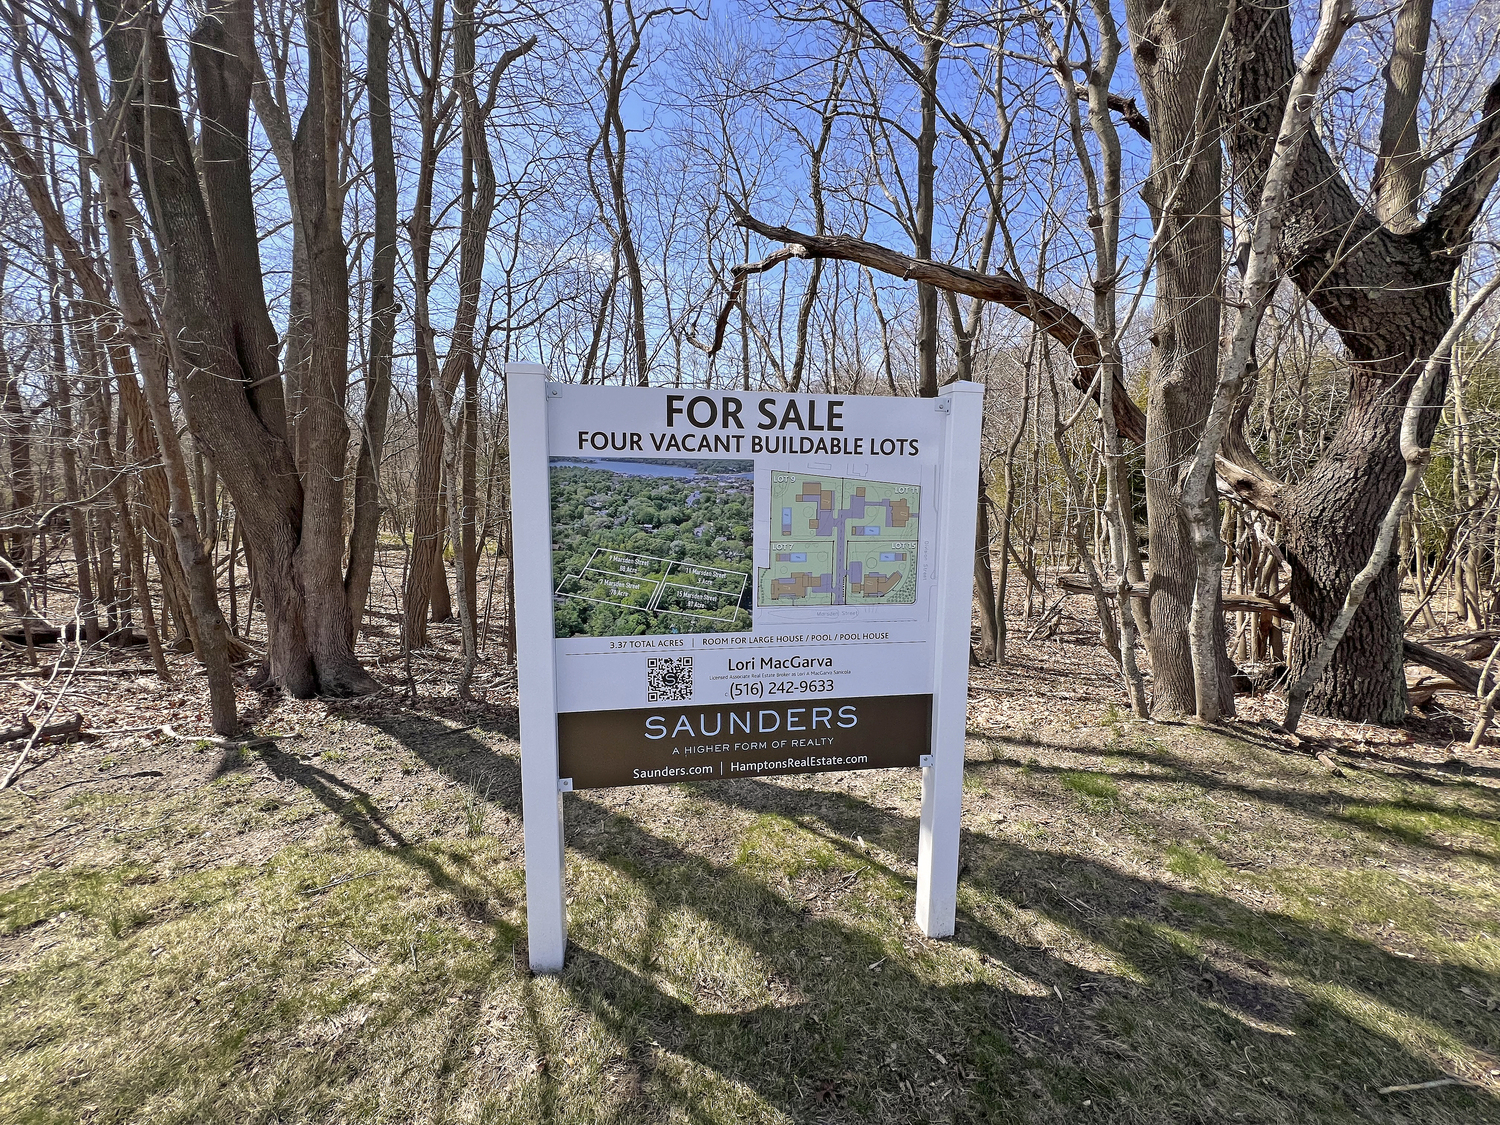 Four lots totaling 3.37 acres on the north side of Marsden Street in the heart of Sag Harbor Village are in contract, sold for an undisclosed sum, after being listed for $9 million by Saunders and Associates.  DANA SHAW